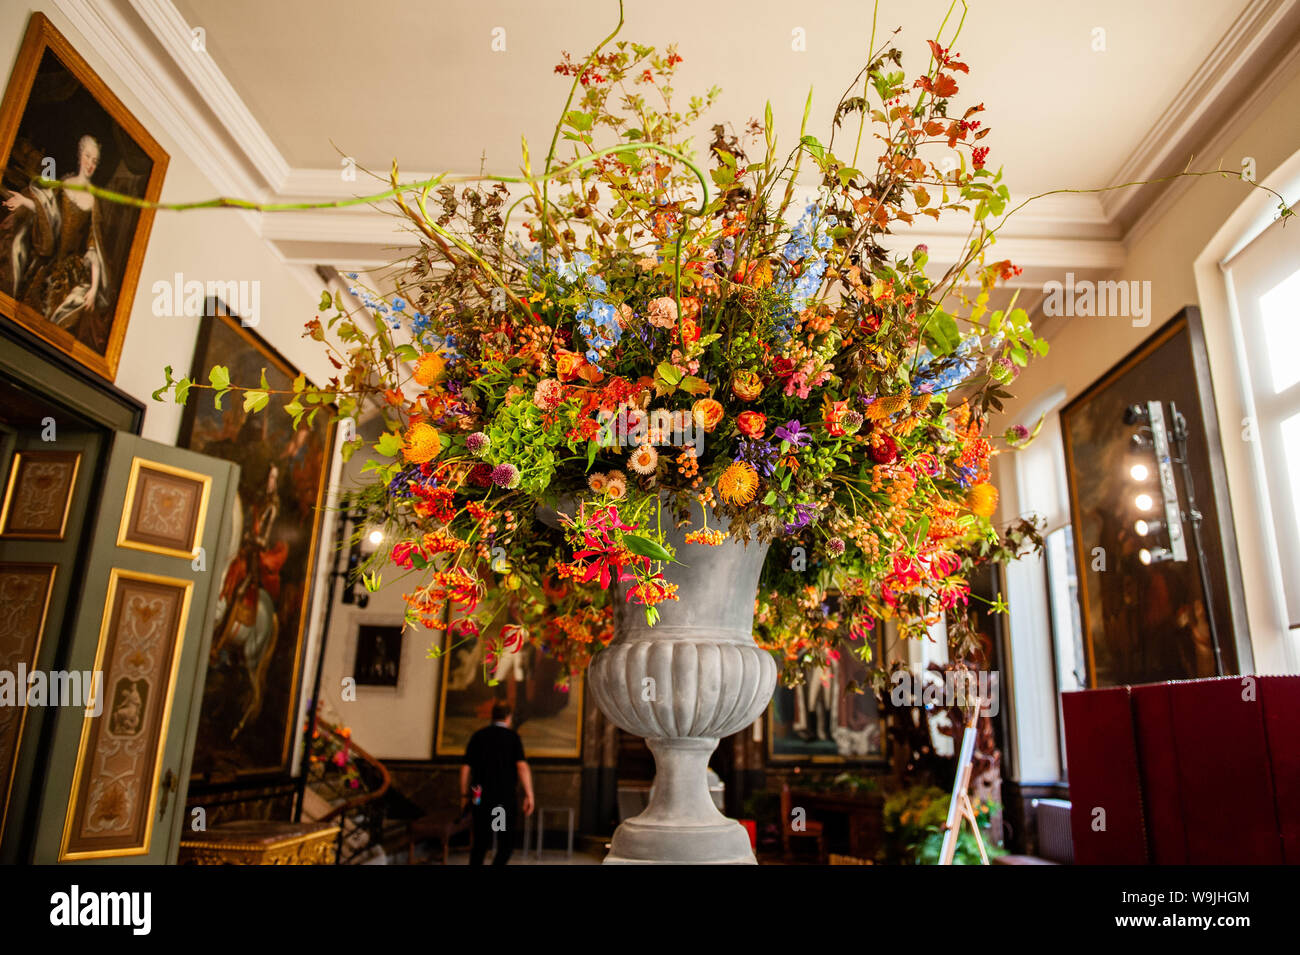 Brussels, North Brabant, Belgium. 14th Aug, 2019. A bucket of flowers is  seen in one of the halls during the occasion.Flower time is a biennial  initiative that was launched in 2013 by